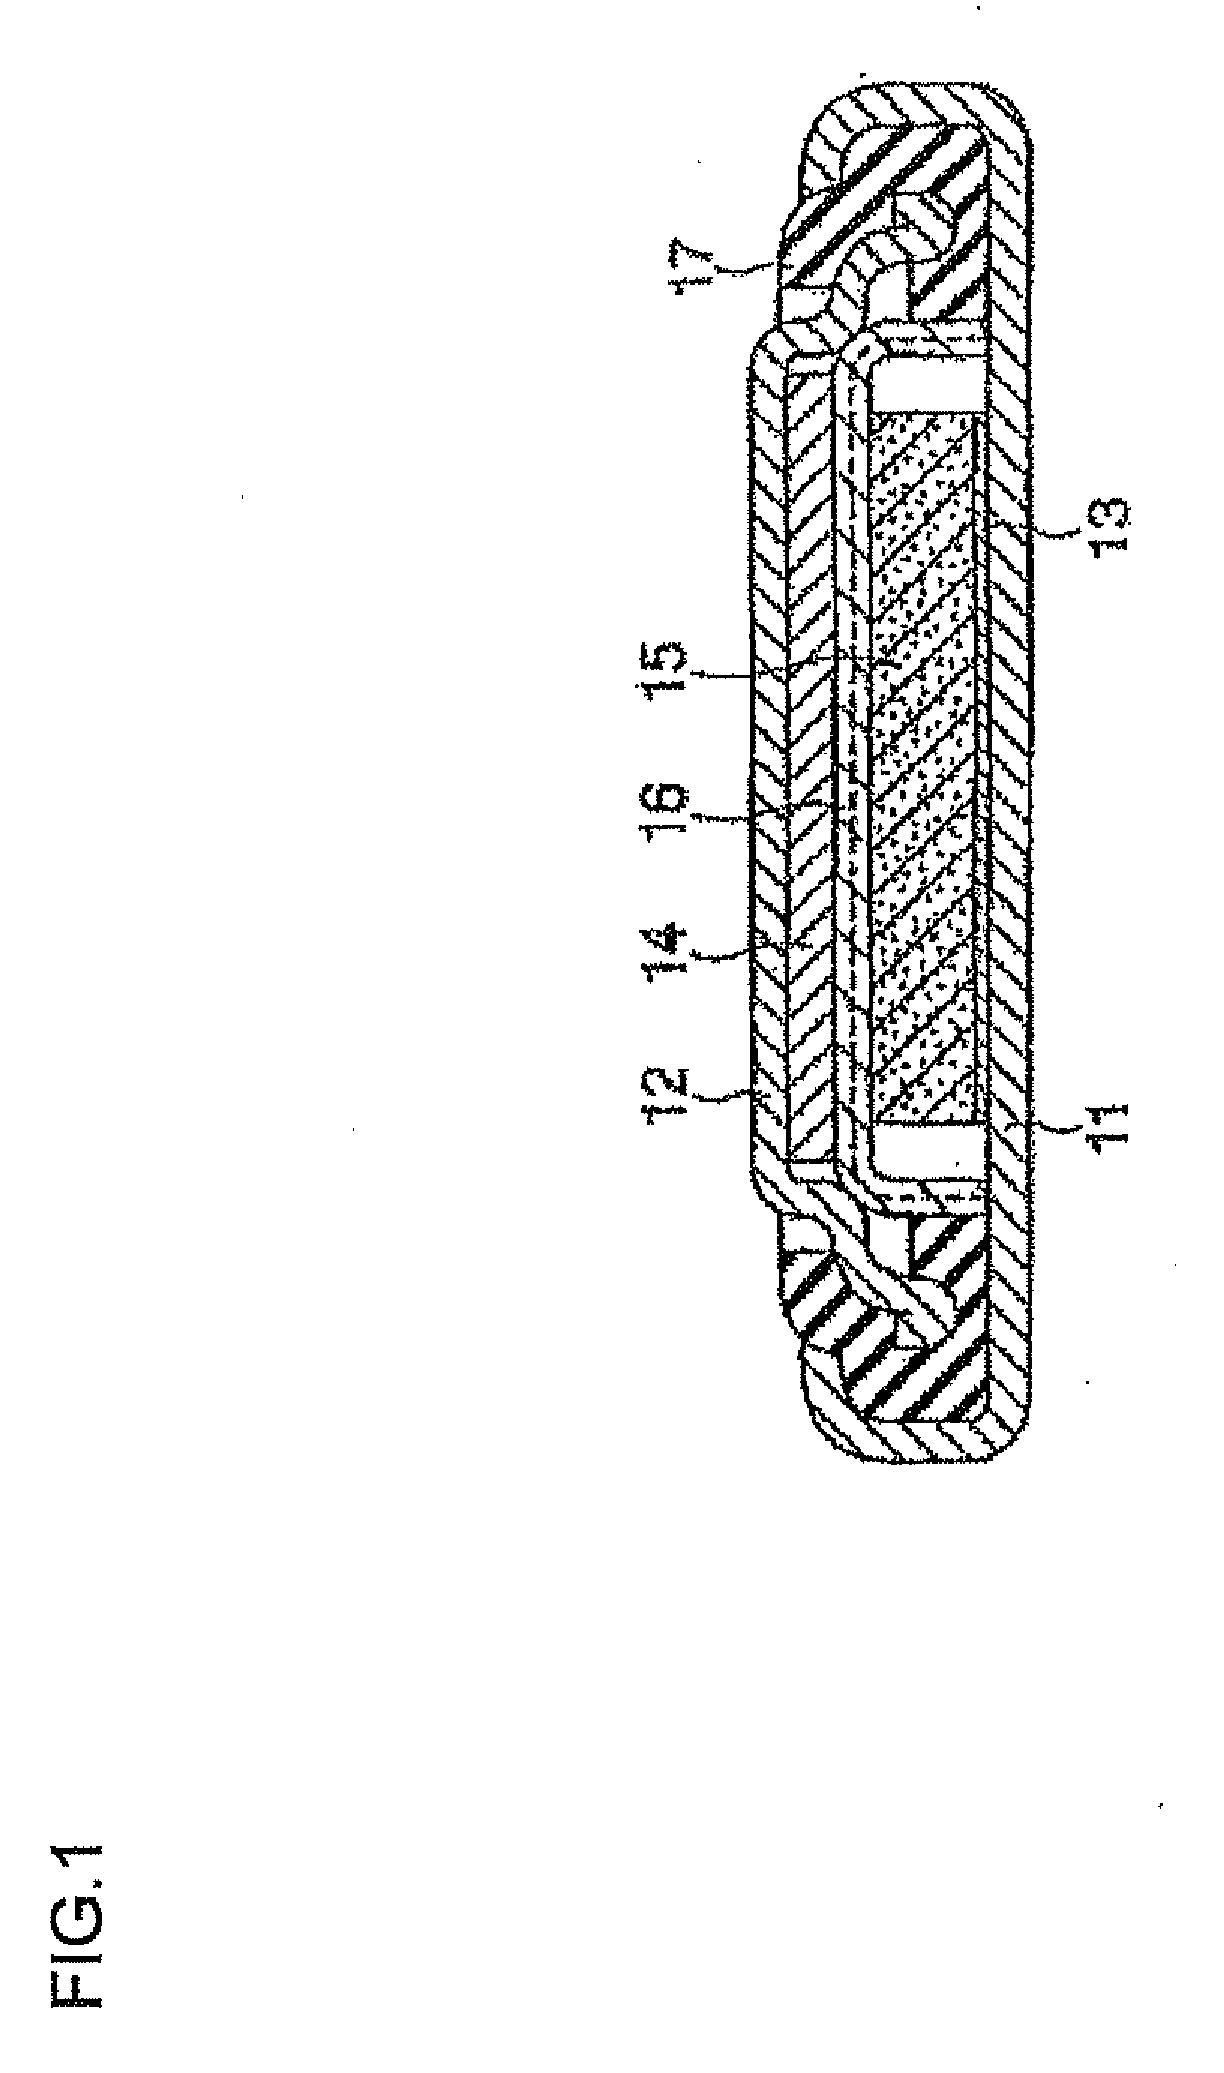 Lithium Transition Metal Oxide Having Layered Structure